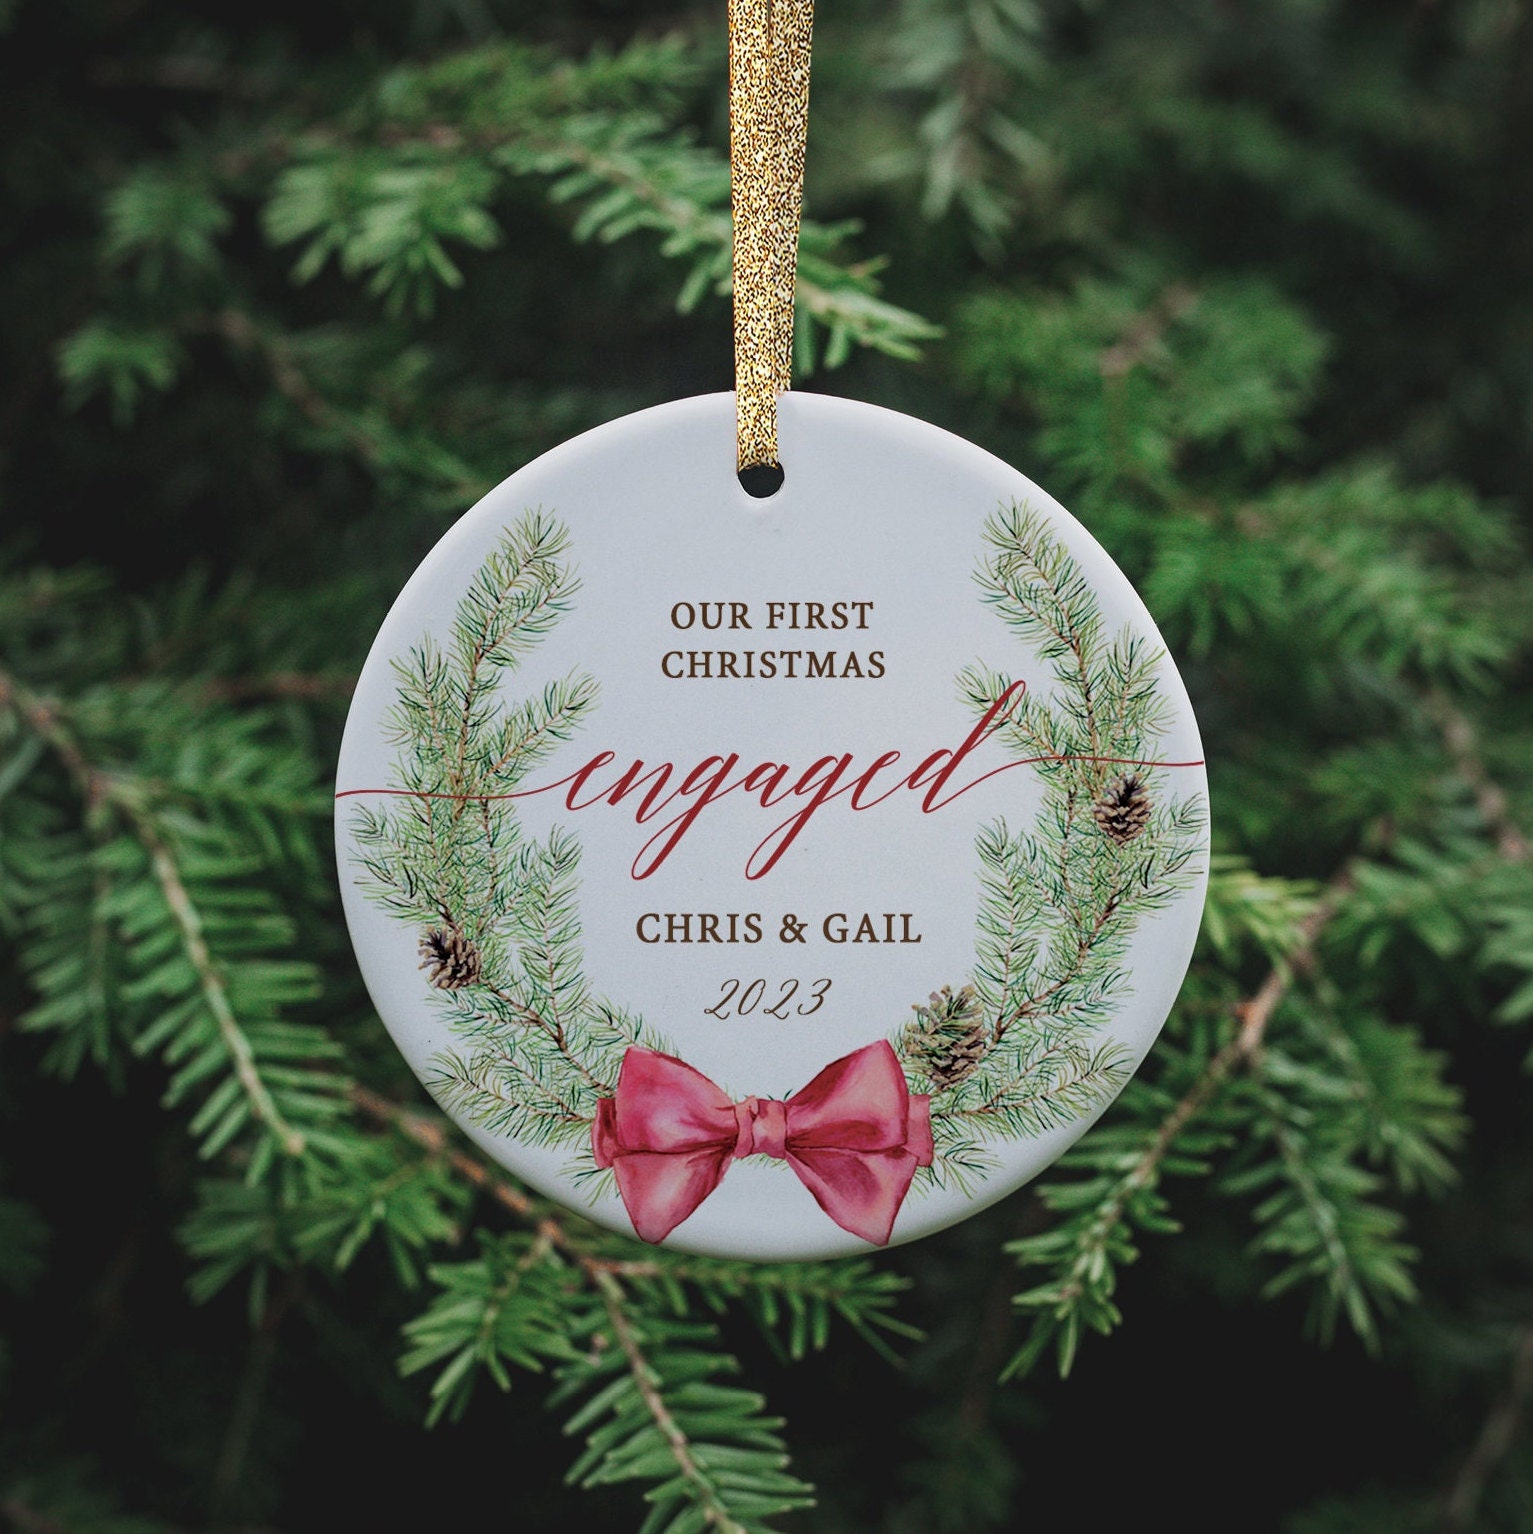 Our first Christmas Engaged ornament